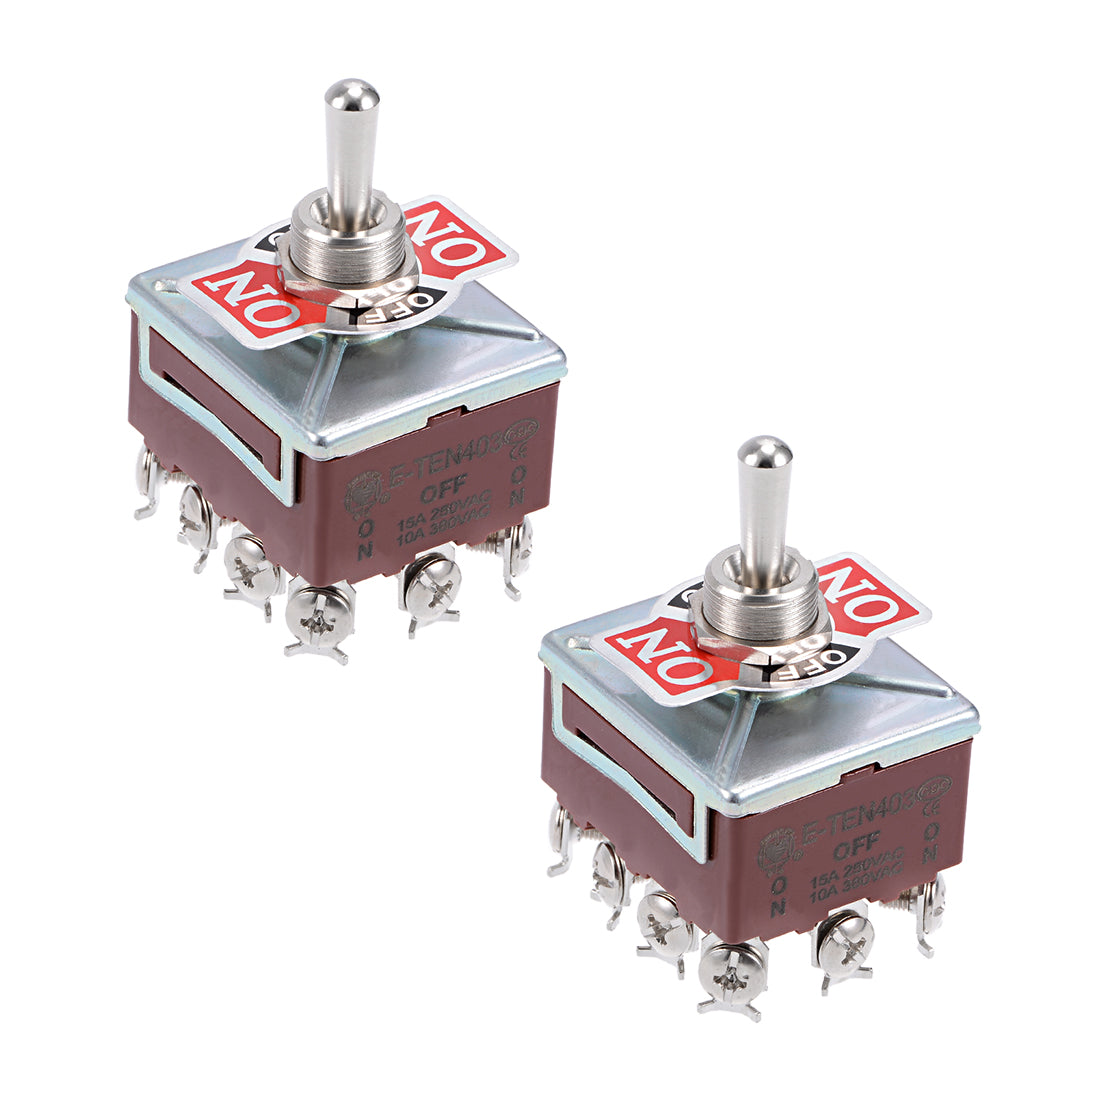 uxcell Uxcell 4PDT Lacthing Rocker Toggle Switch Heavy-Duty 15A 250V 12P ON/OFF/ON Metal Bat 2pcs